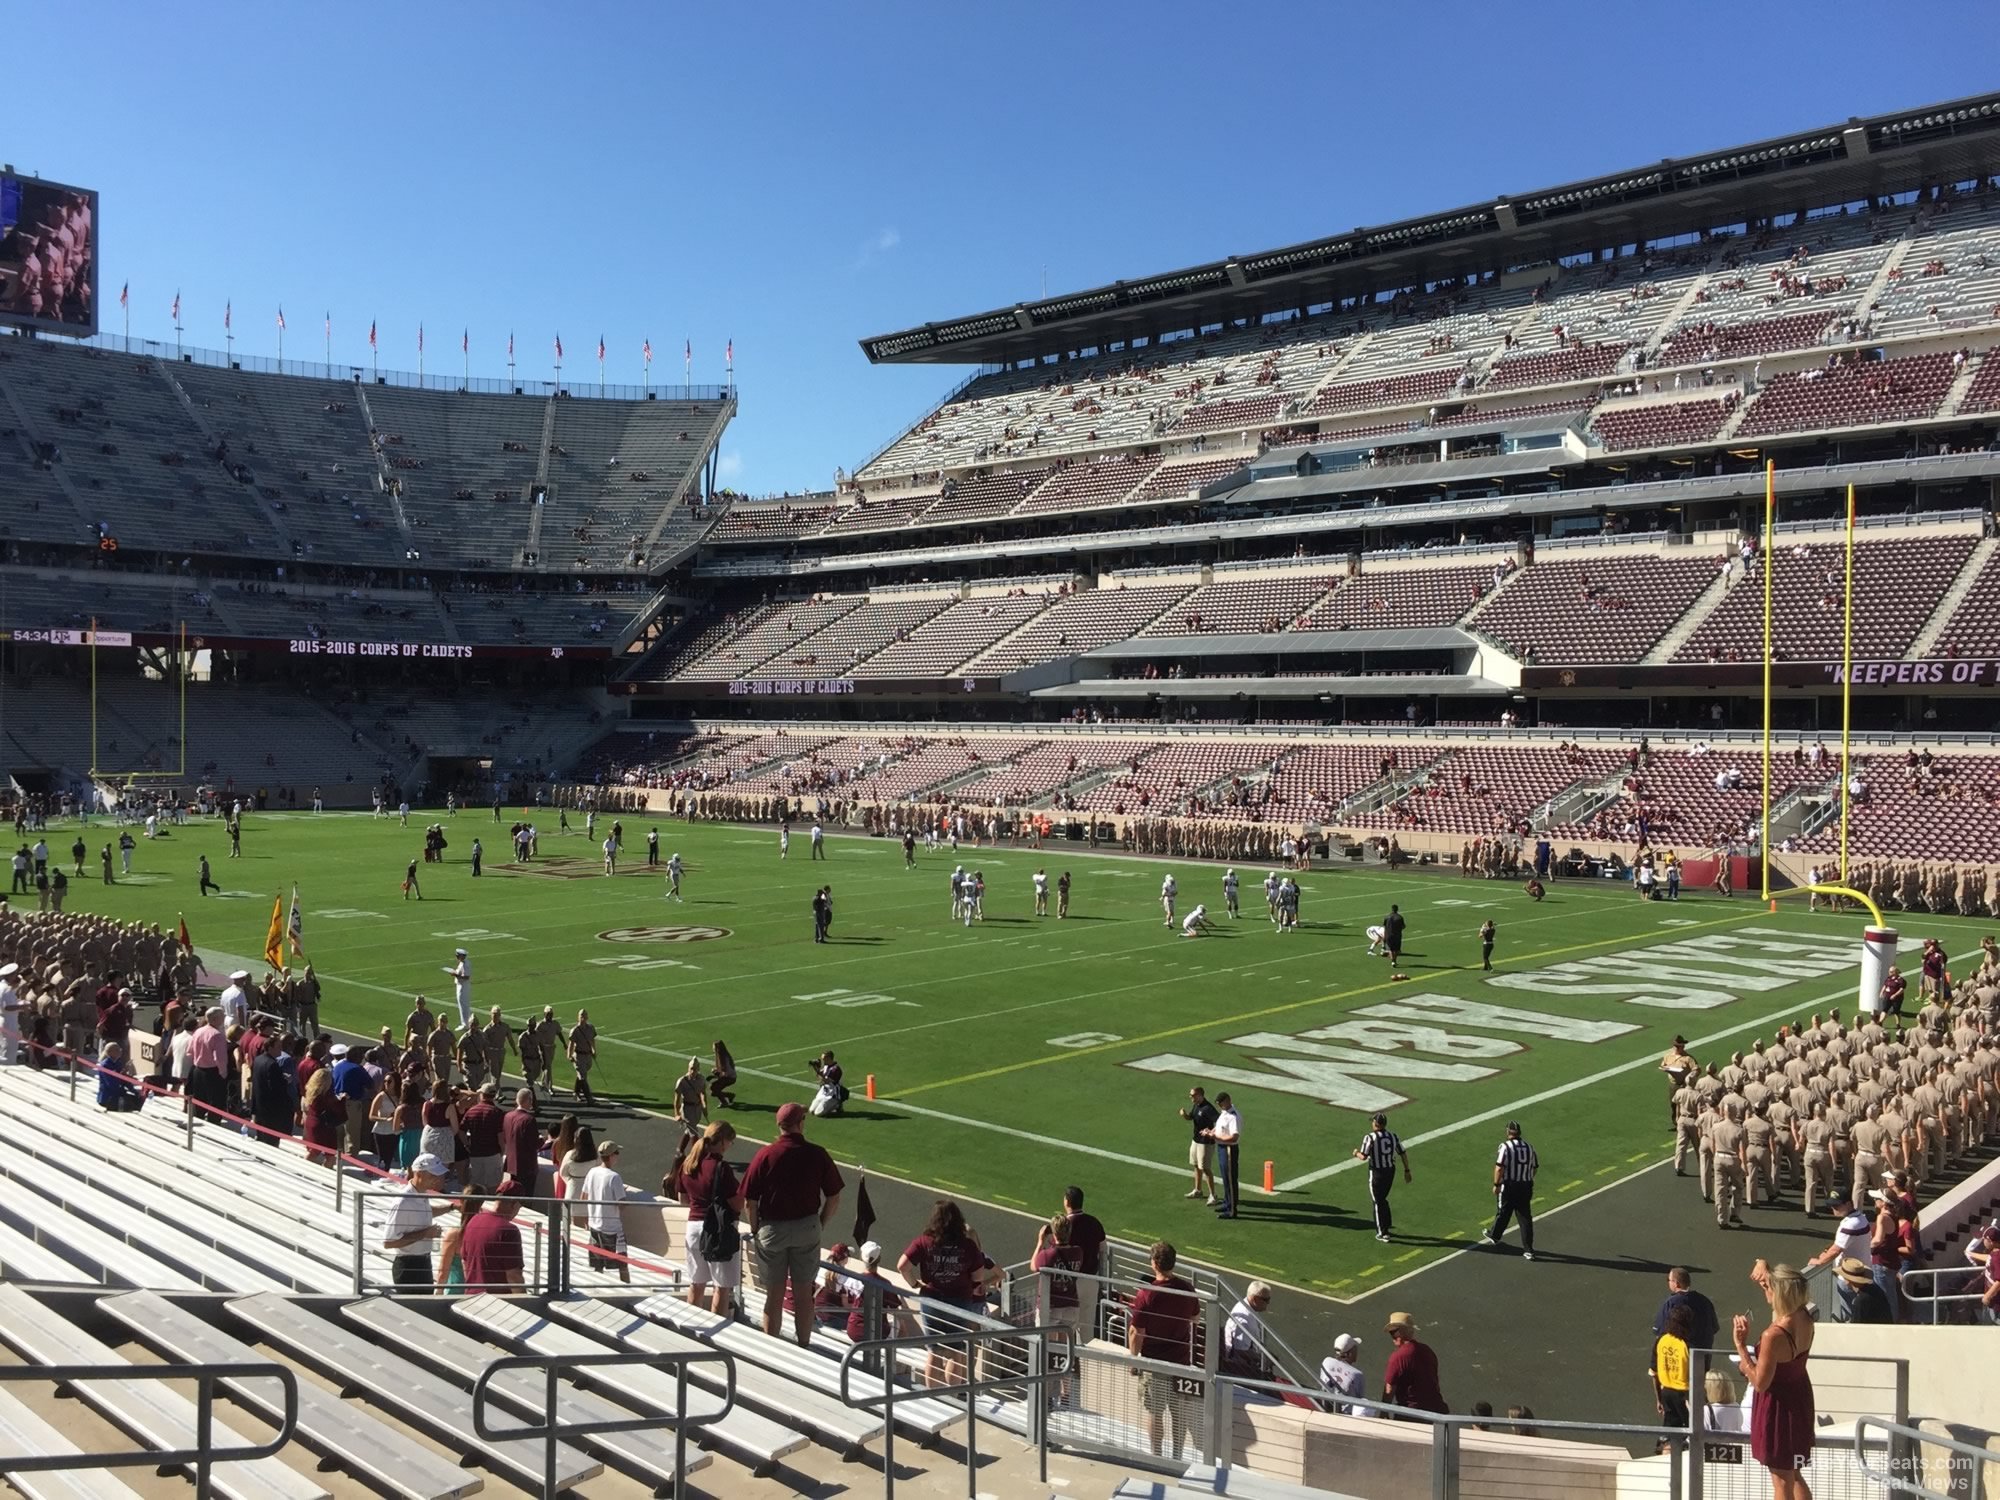 section 121, row 20 seat view  - kyle field